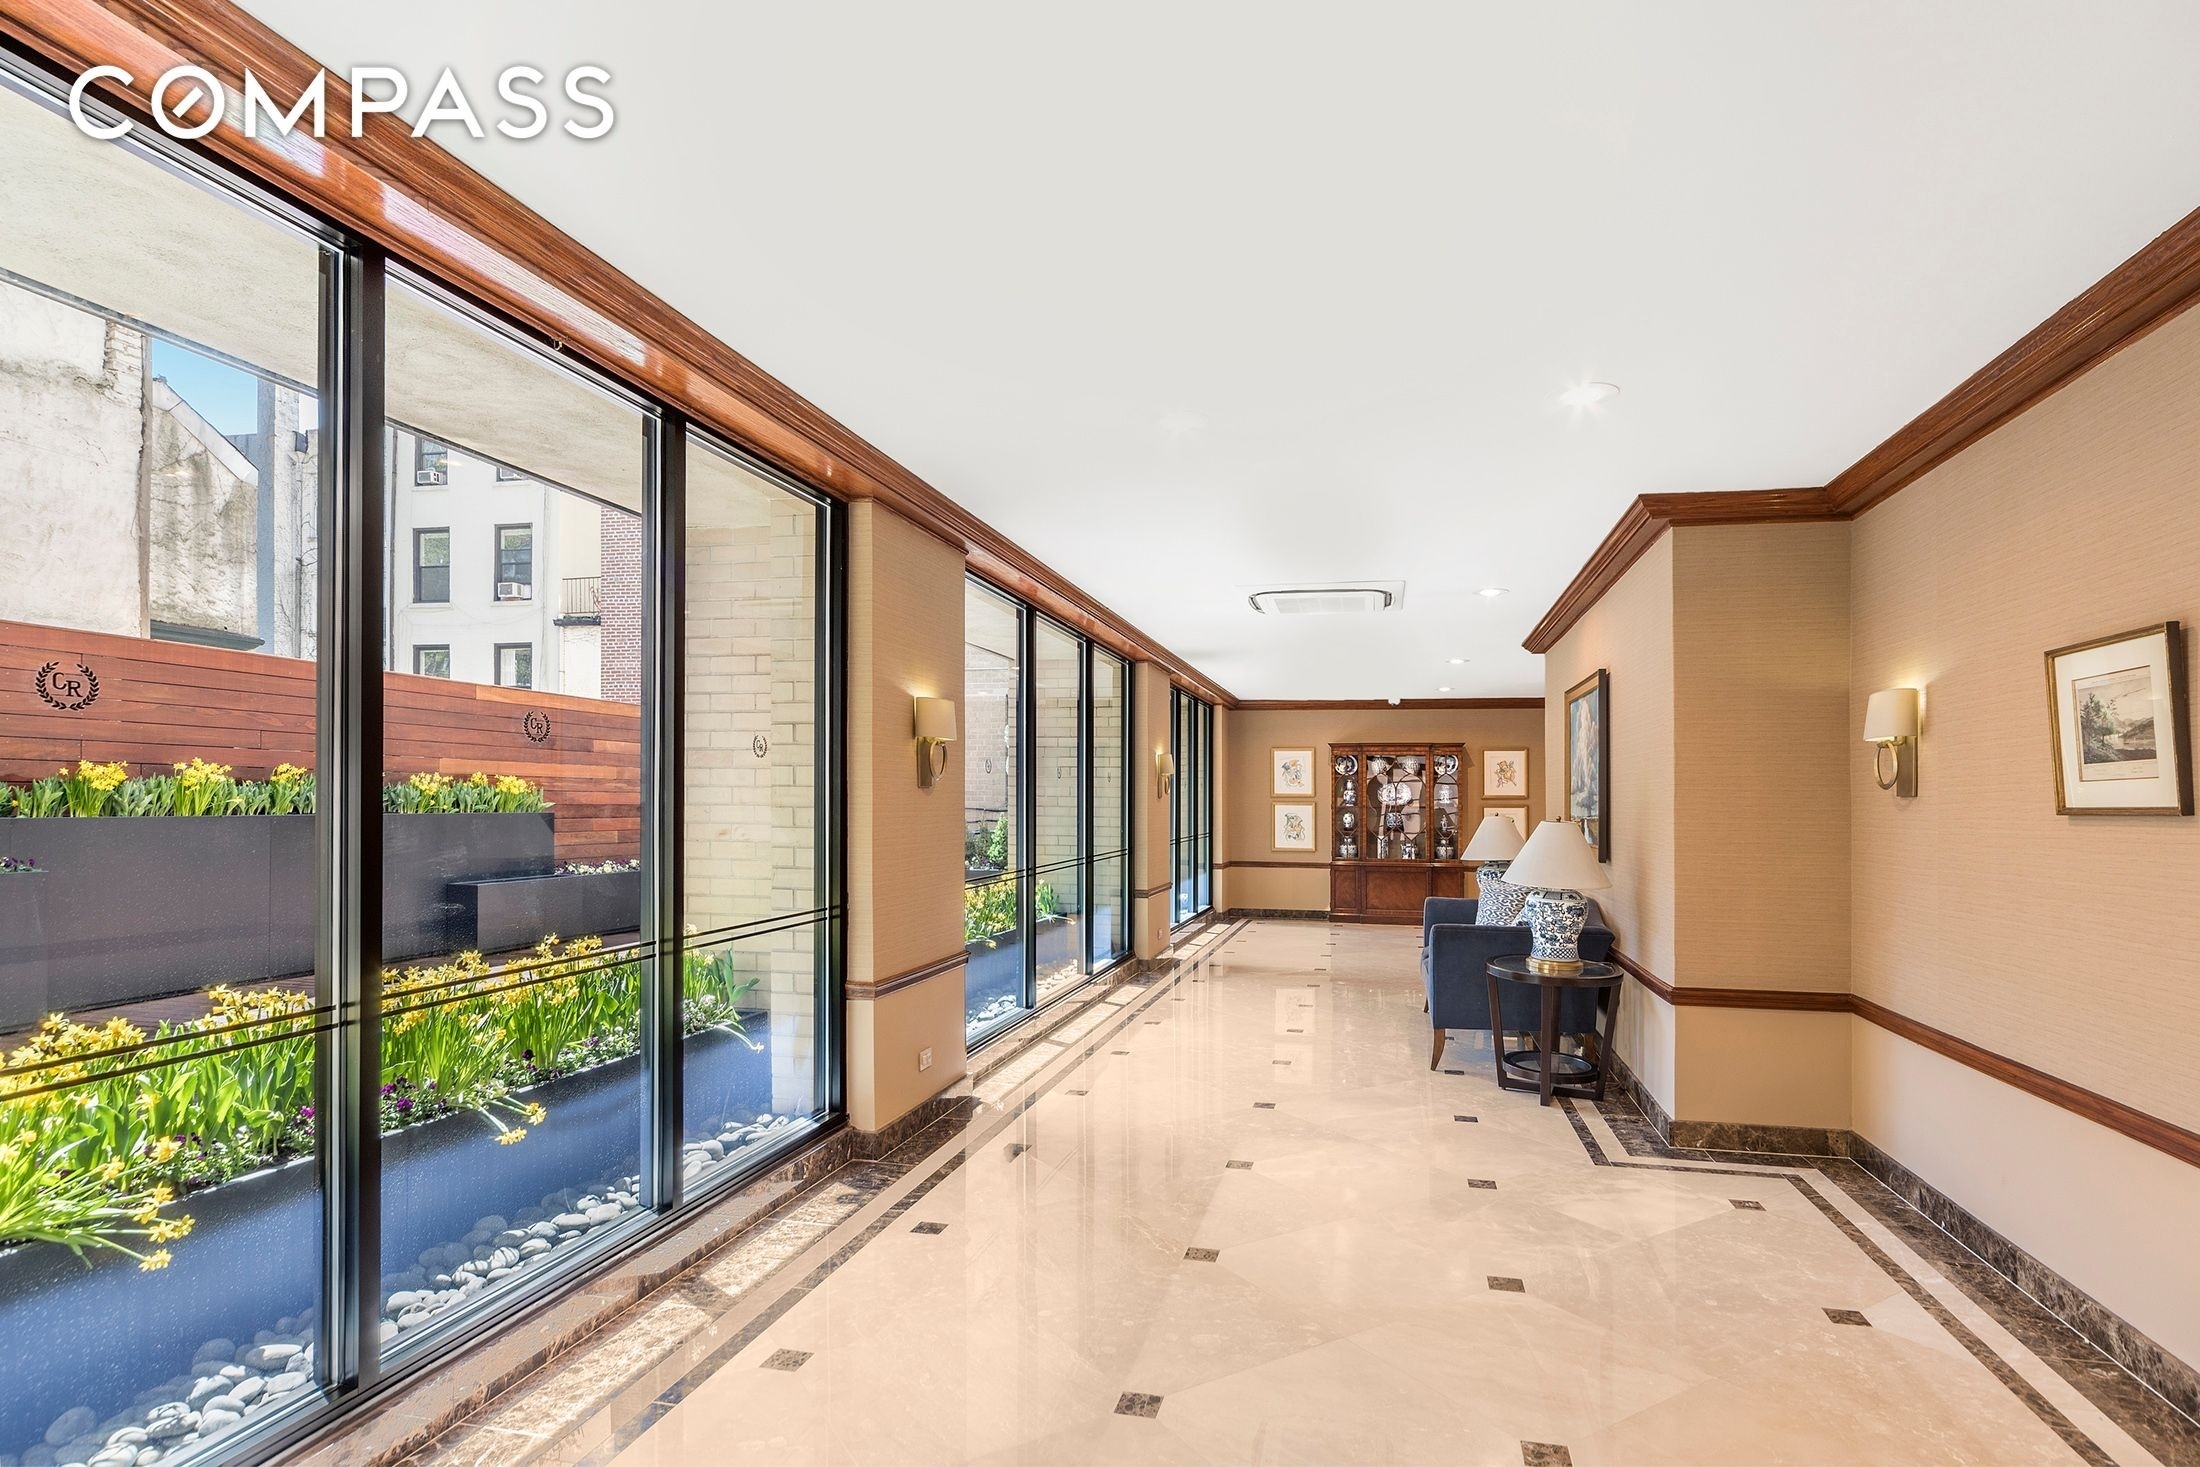 10. Co-op Properties for Sale at Carlton Regency, 137 E 36TH ST, 5E Murray Hill, New York, NY 10016